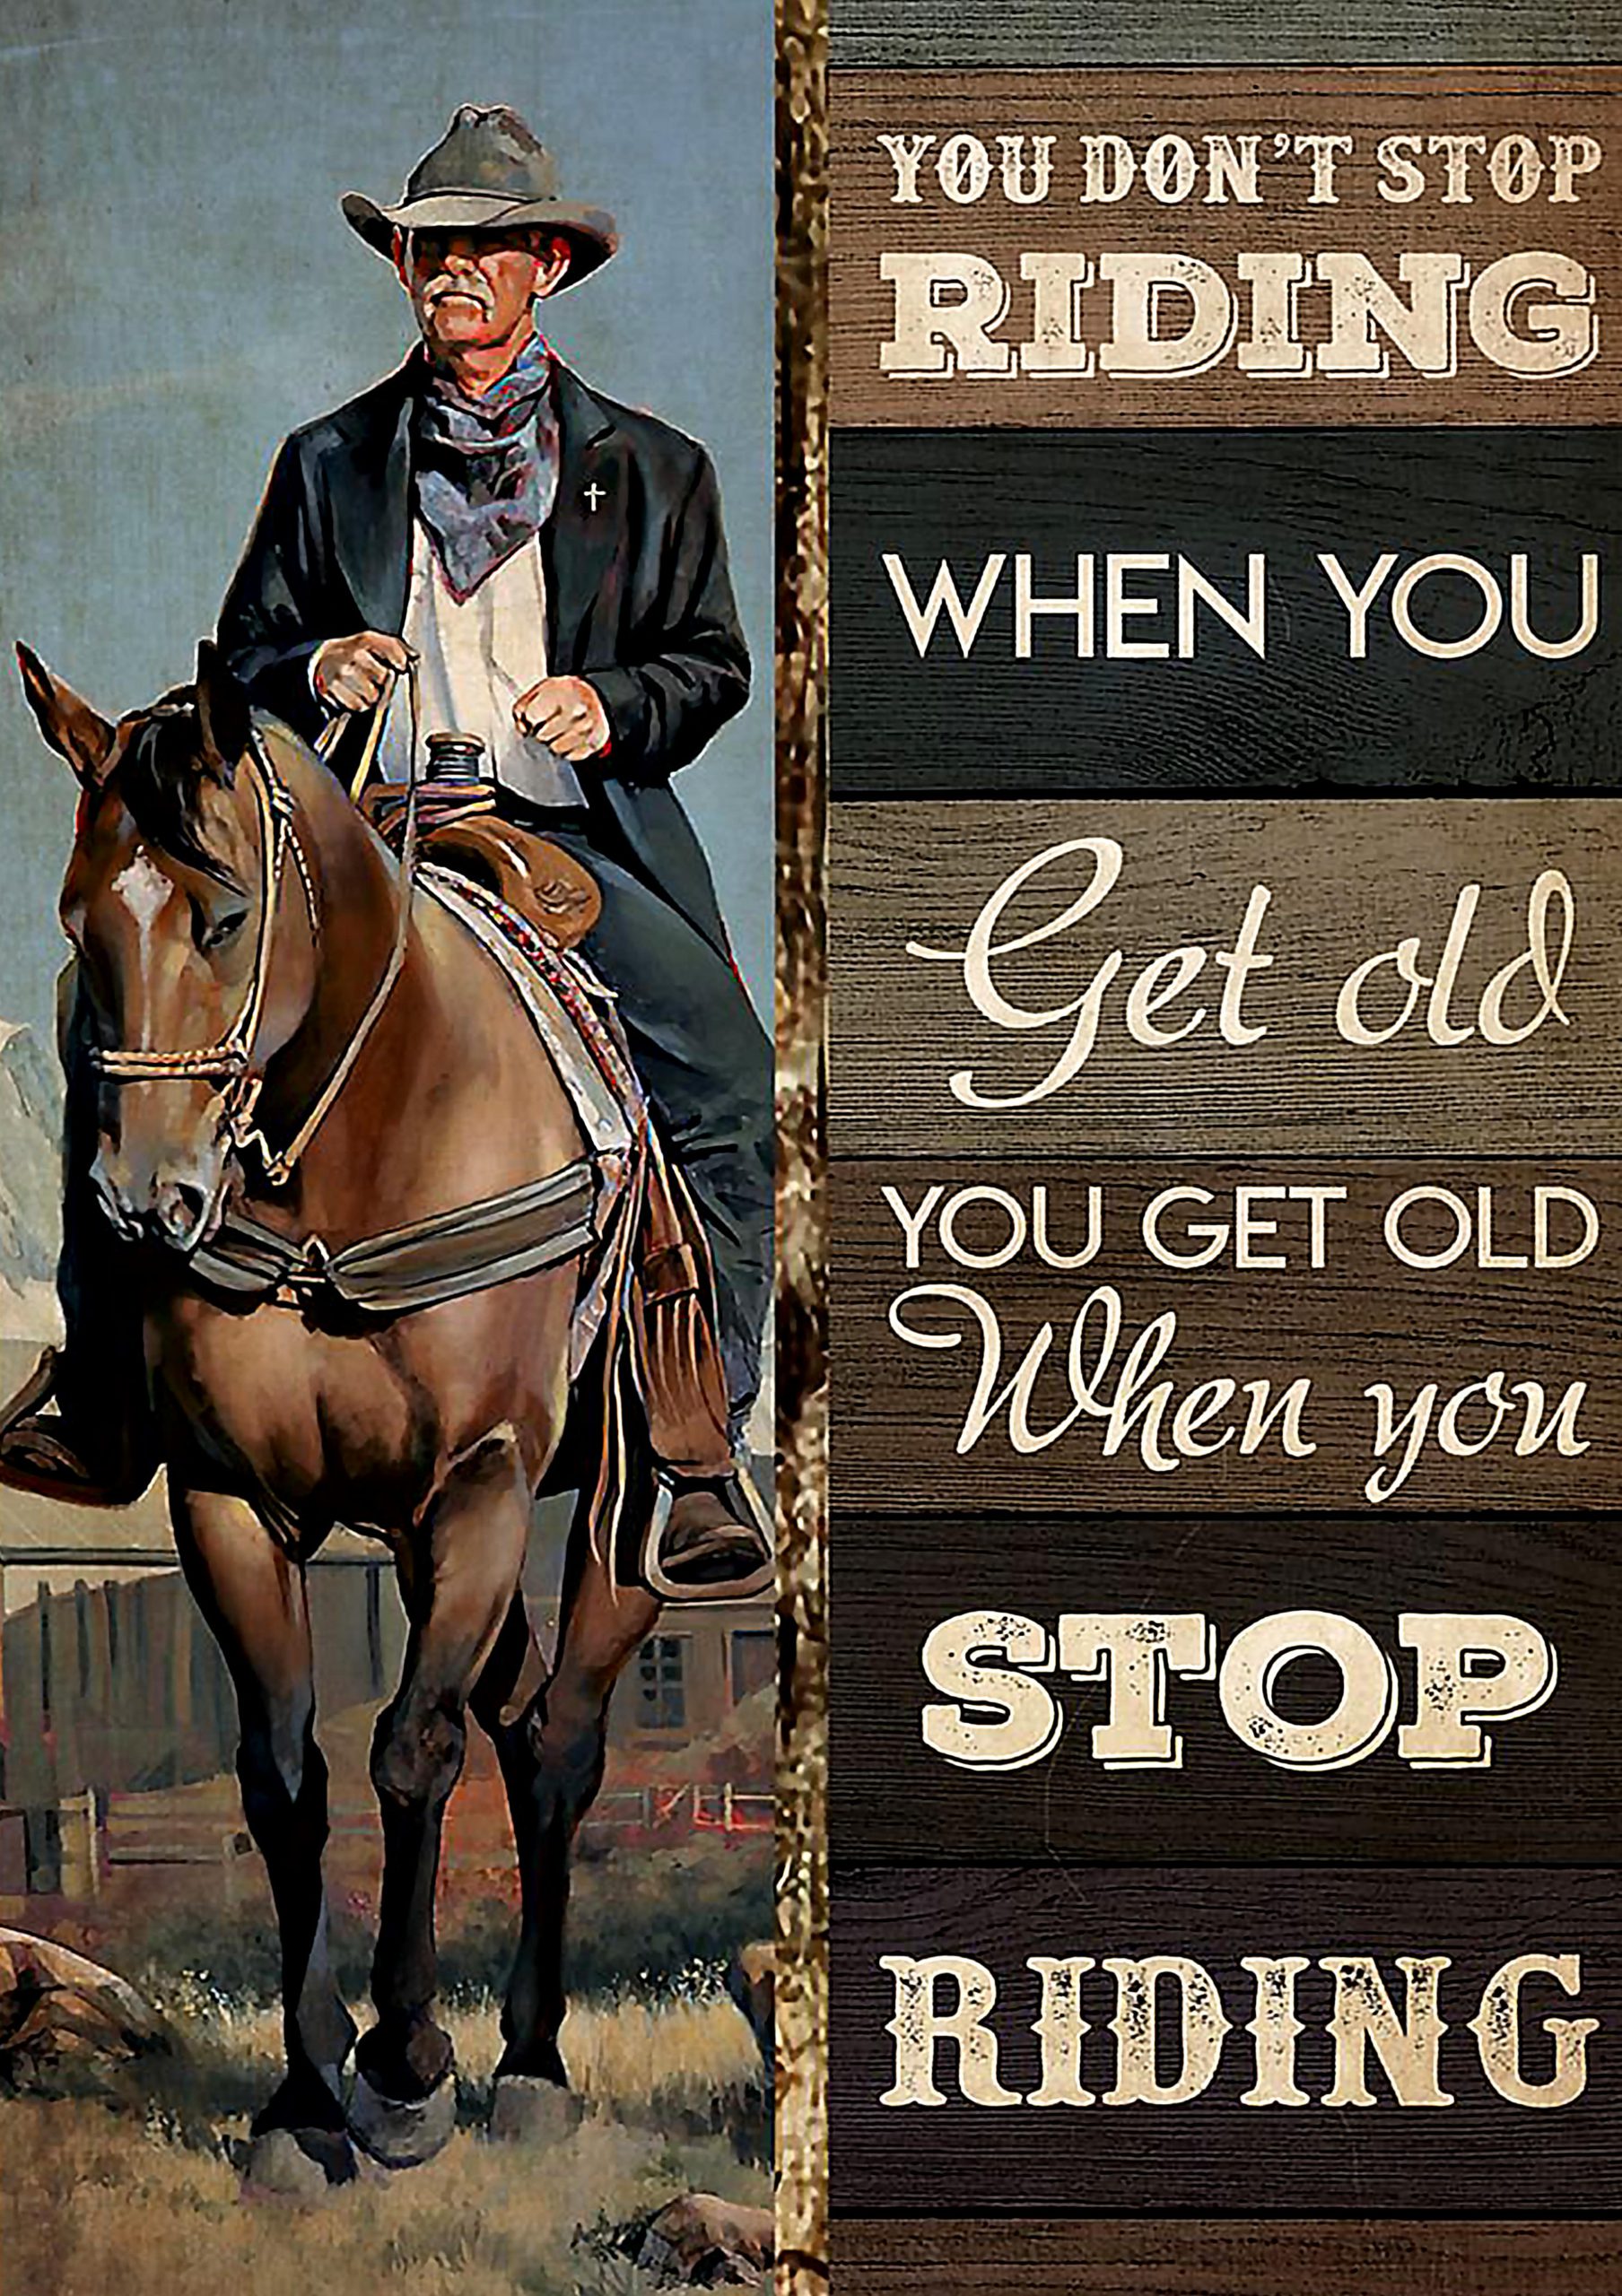 vintage old cowboy you dont stop riding when you get old poster 1 - Copy (2)